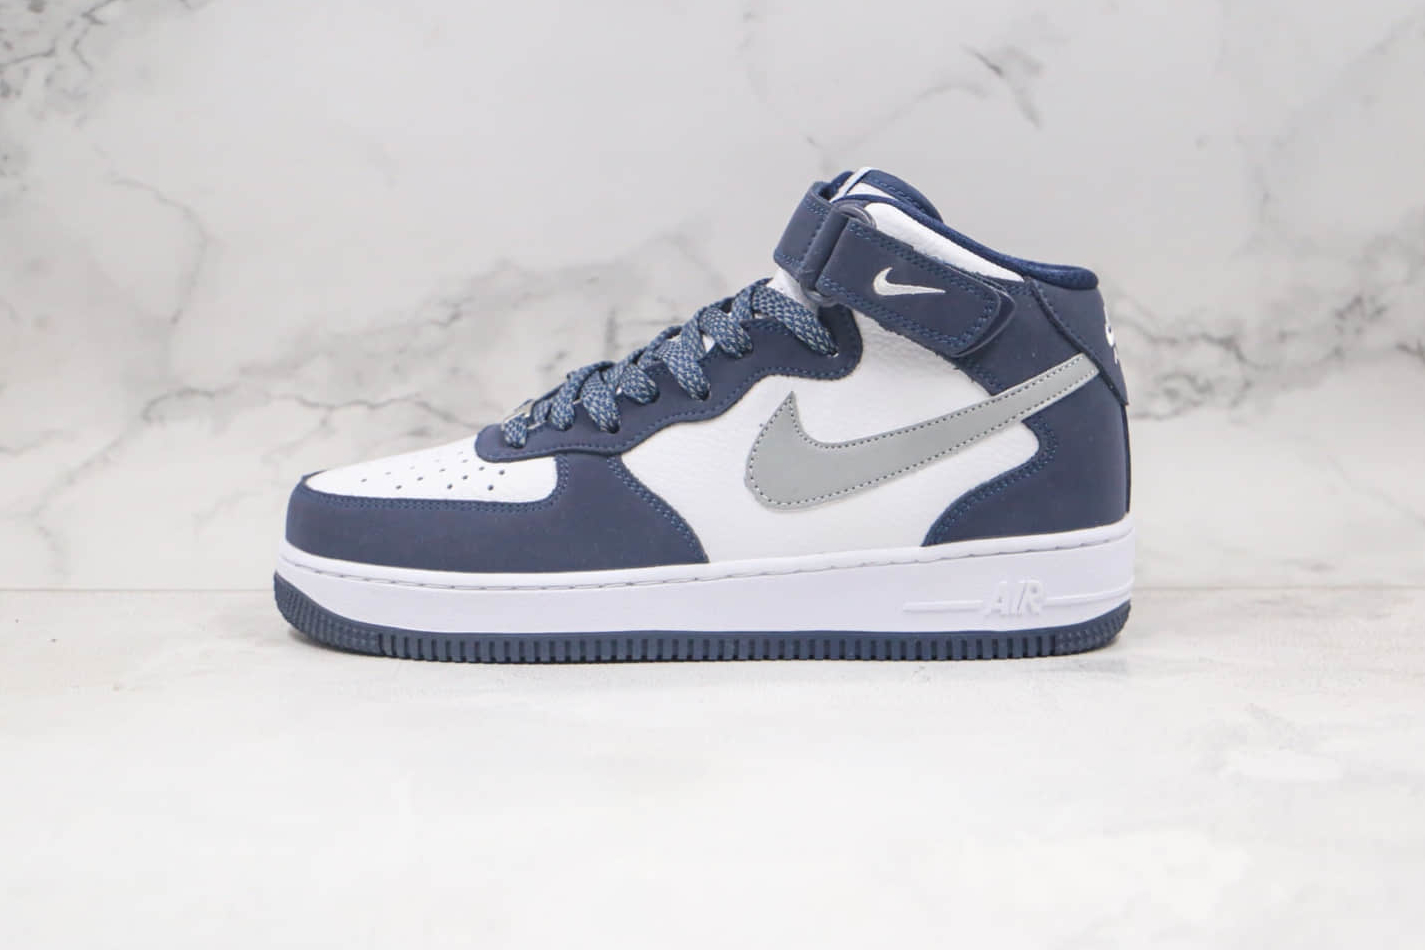 Nike Air Force 1 07 Mid Navy White Grey Blue Shoes AQ2263-115 - Stylish and Versatile Sneakers